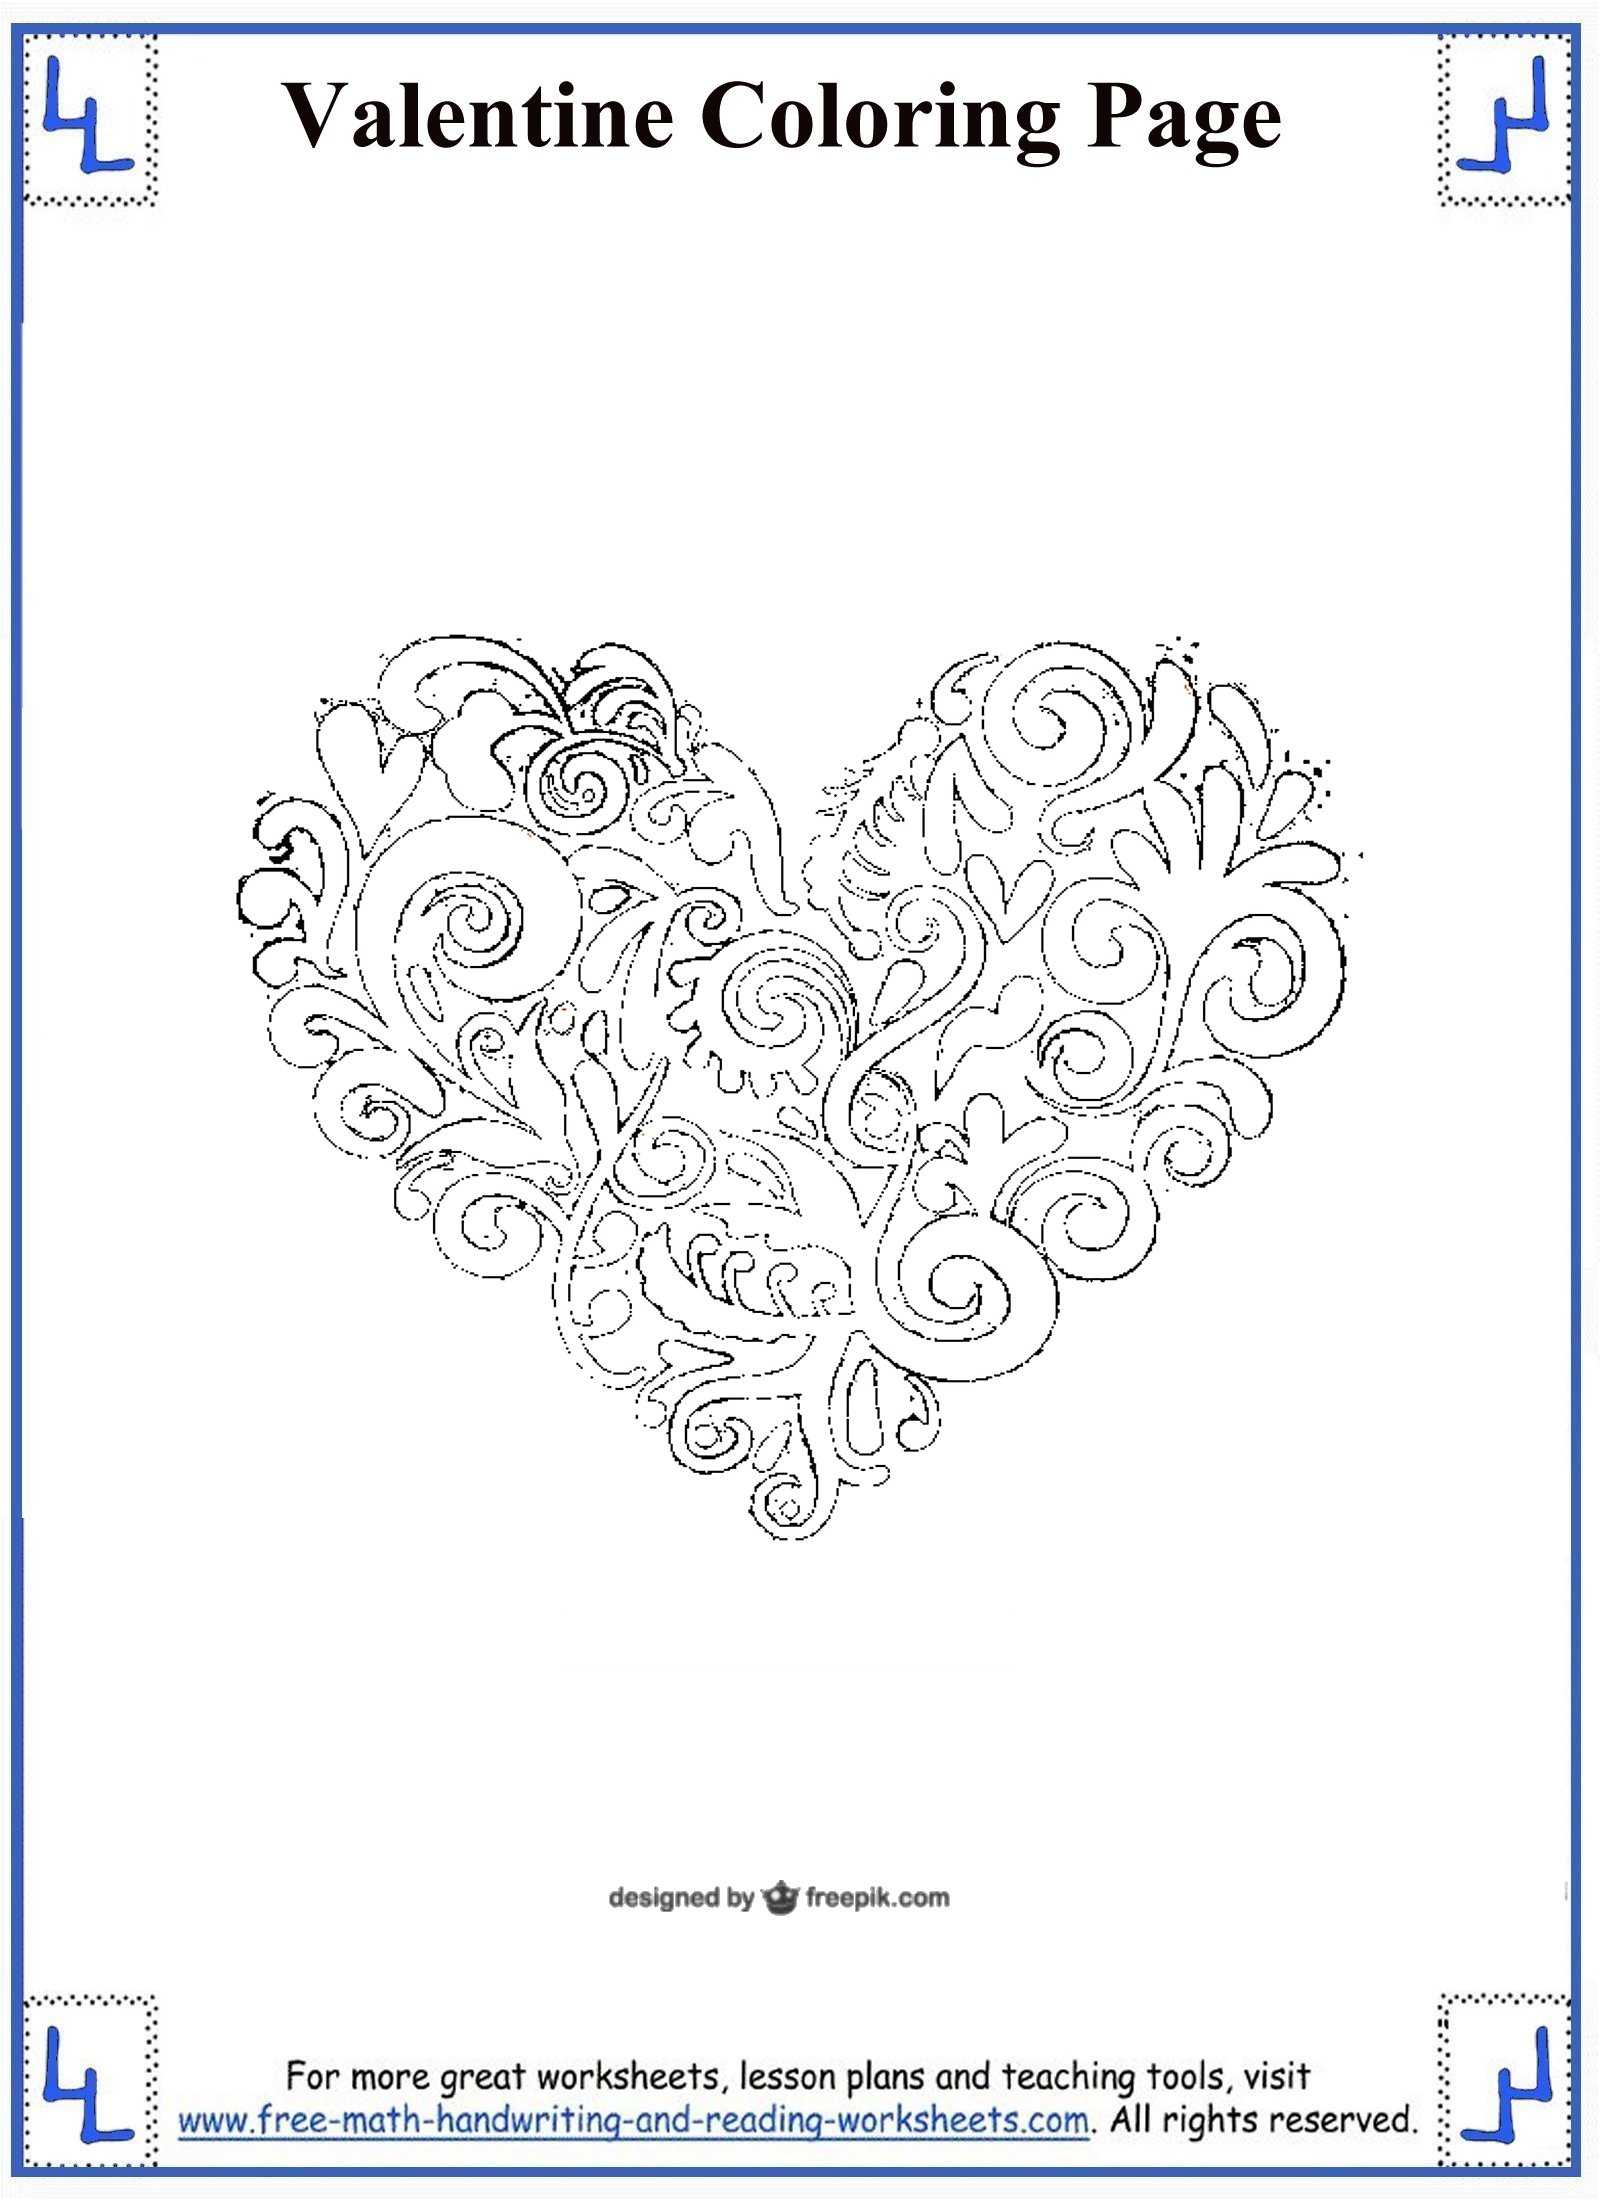 Fun Math Worksheets for Middle School Along with Additions Additions Valentine Addition Worksheets Day Coloring